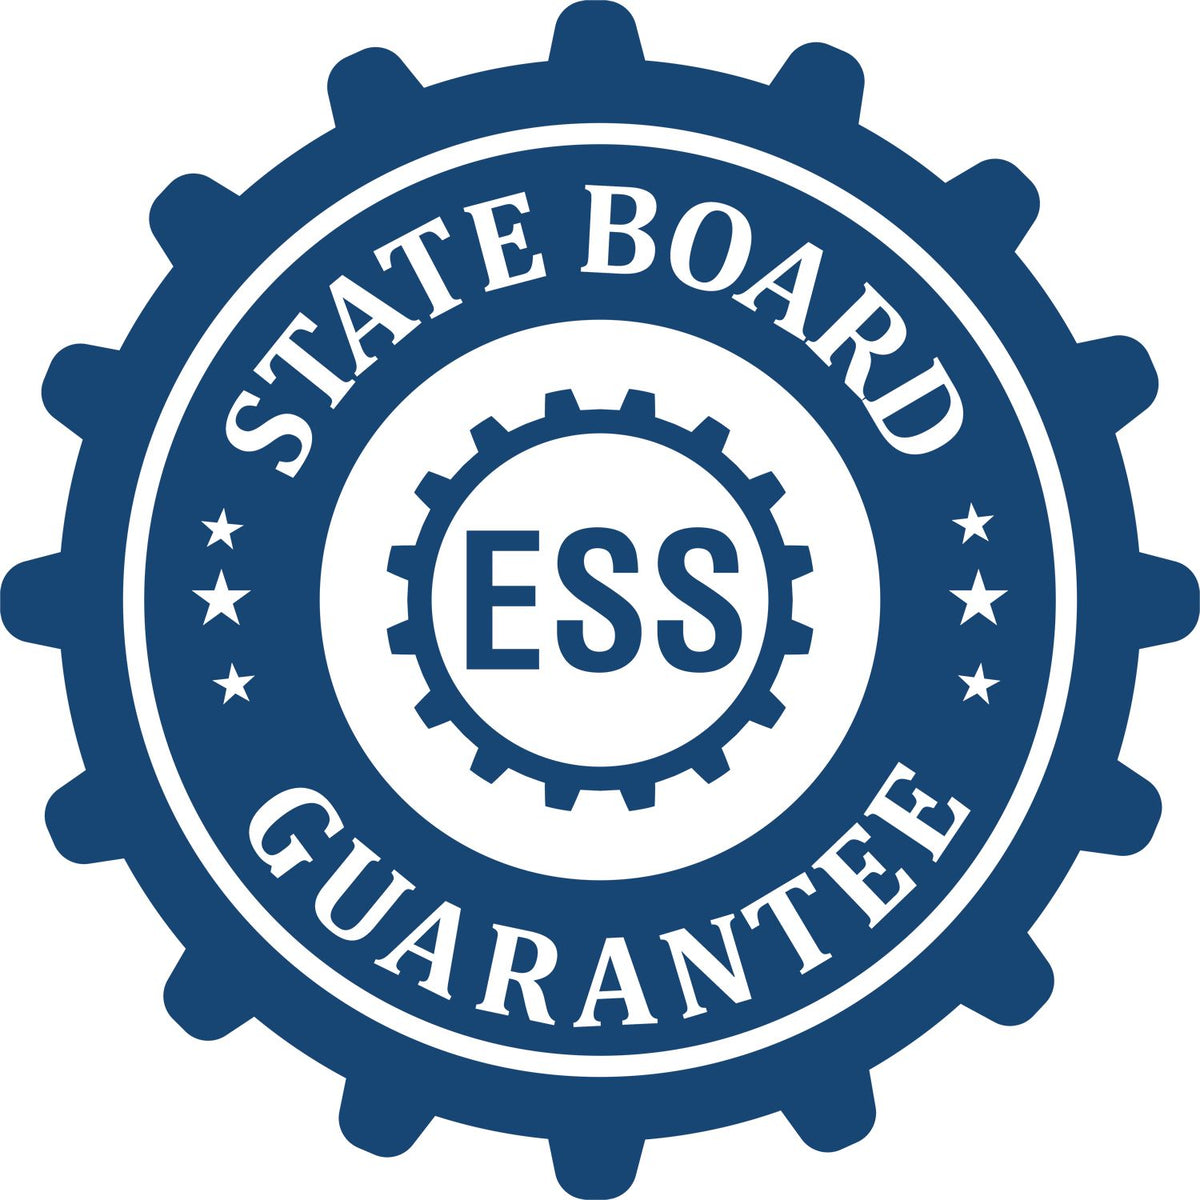 An emblem in a gear shape illustrating a state board guarantee for the Hybrid Arizona Architect Seal